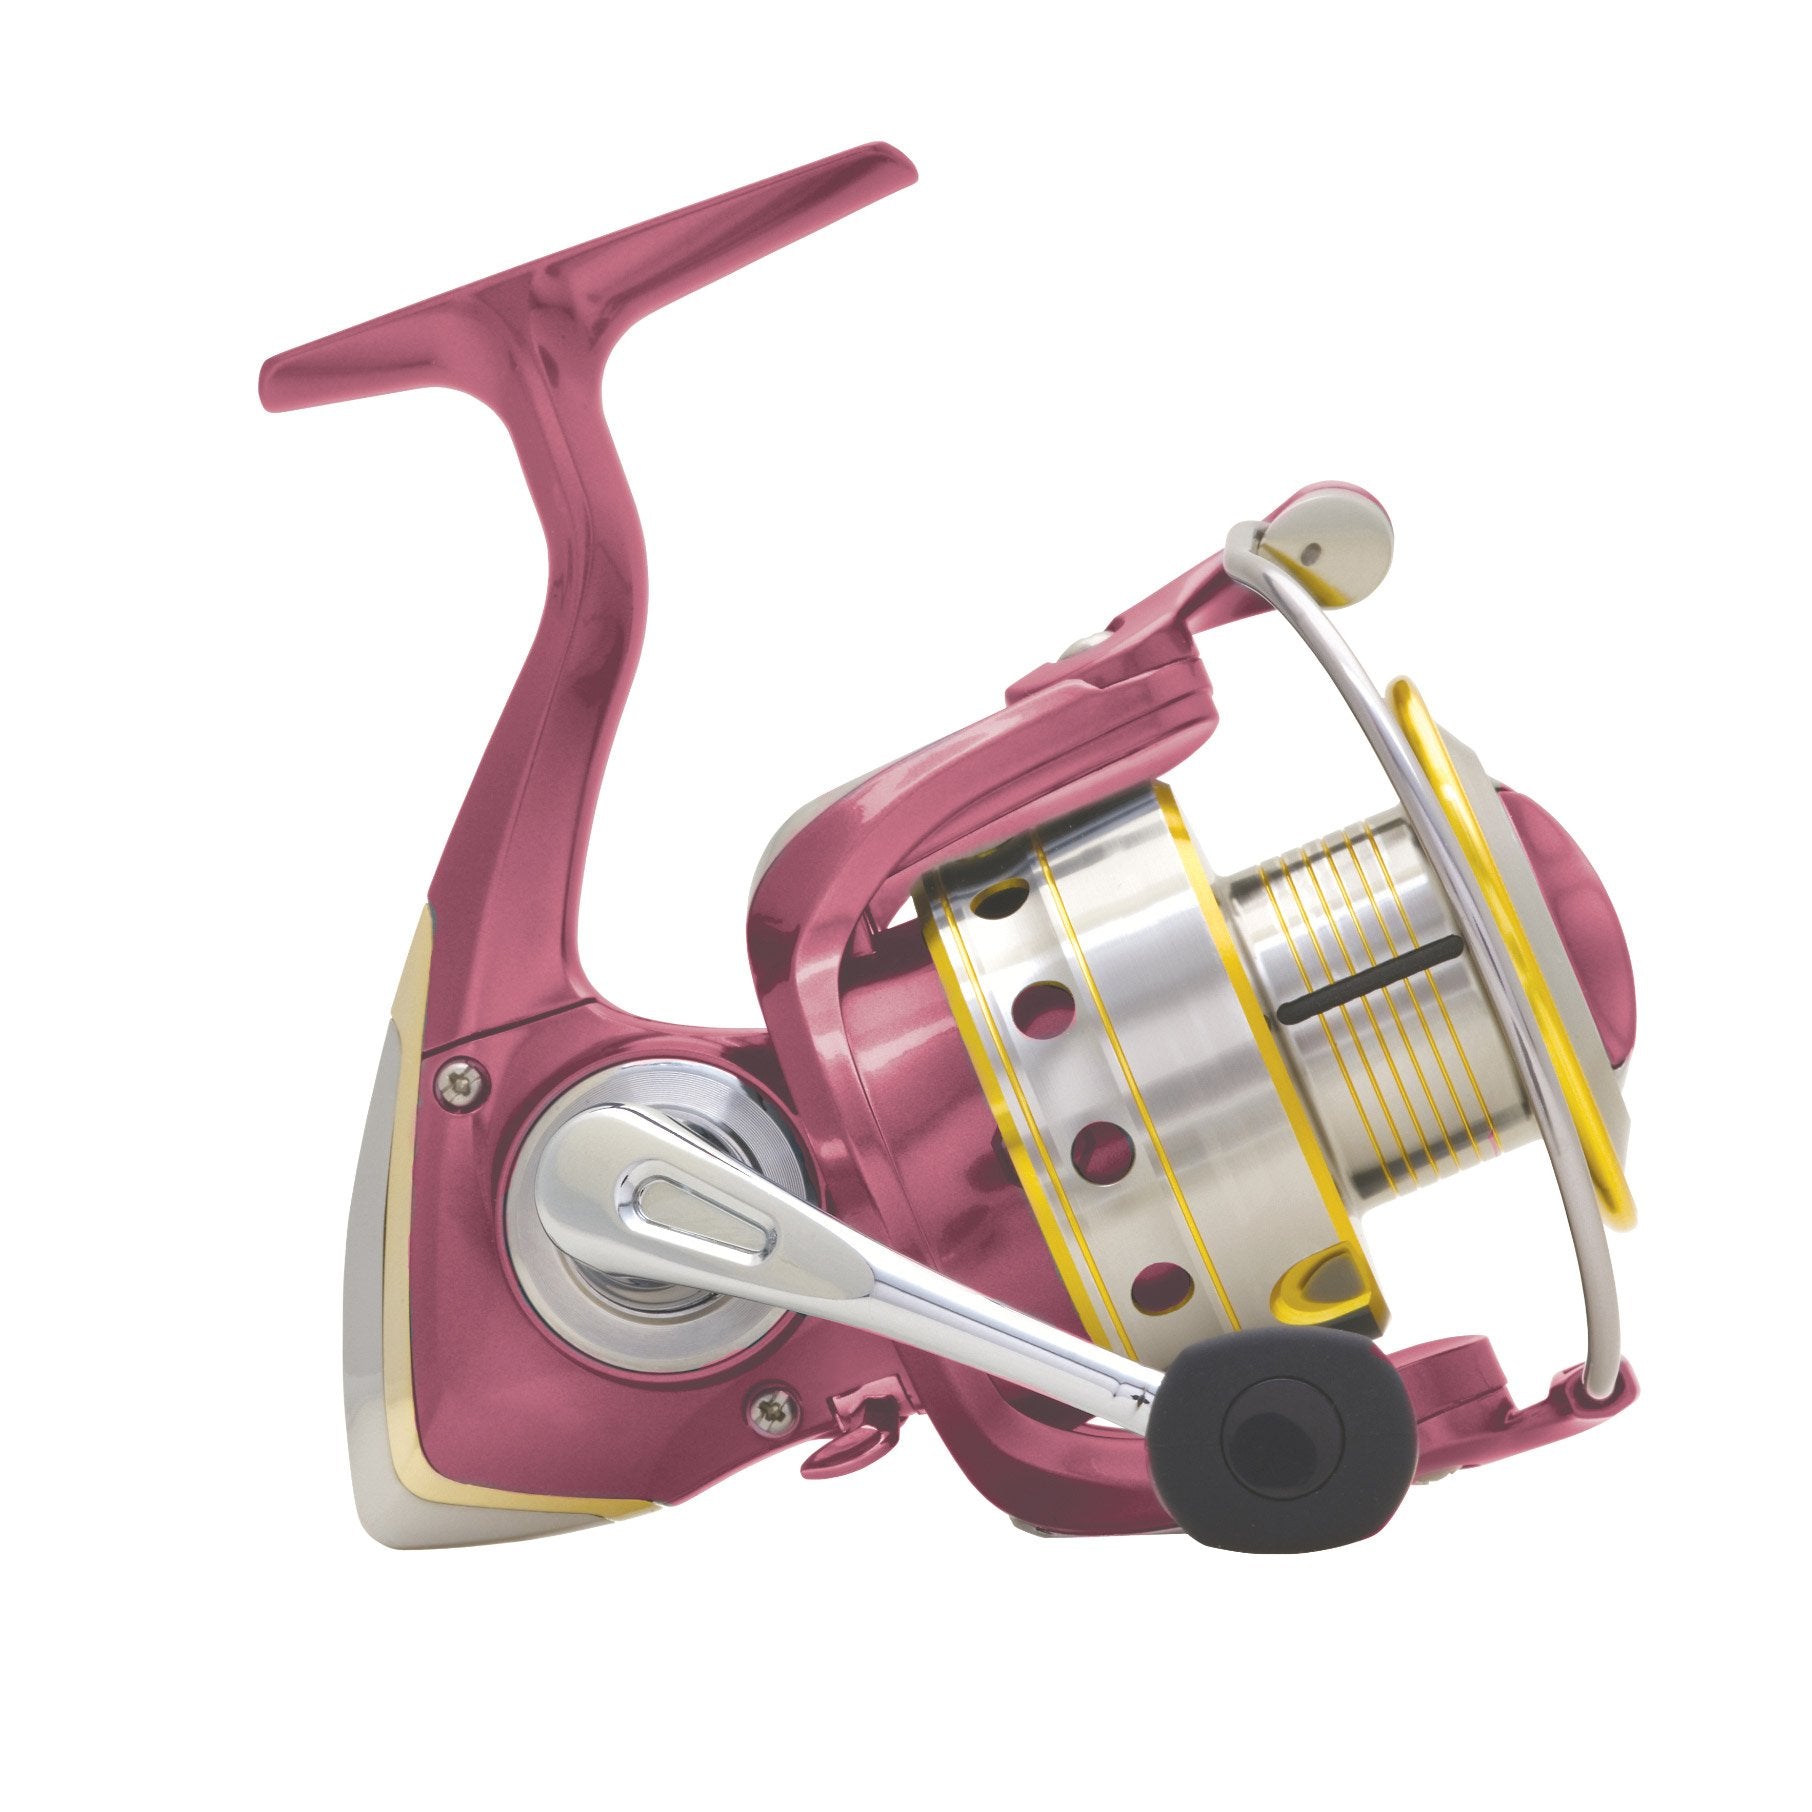 Pflueger Lady Trion Spinning Combo - Tackle Shack